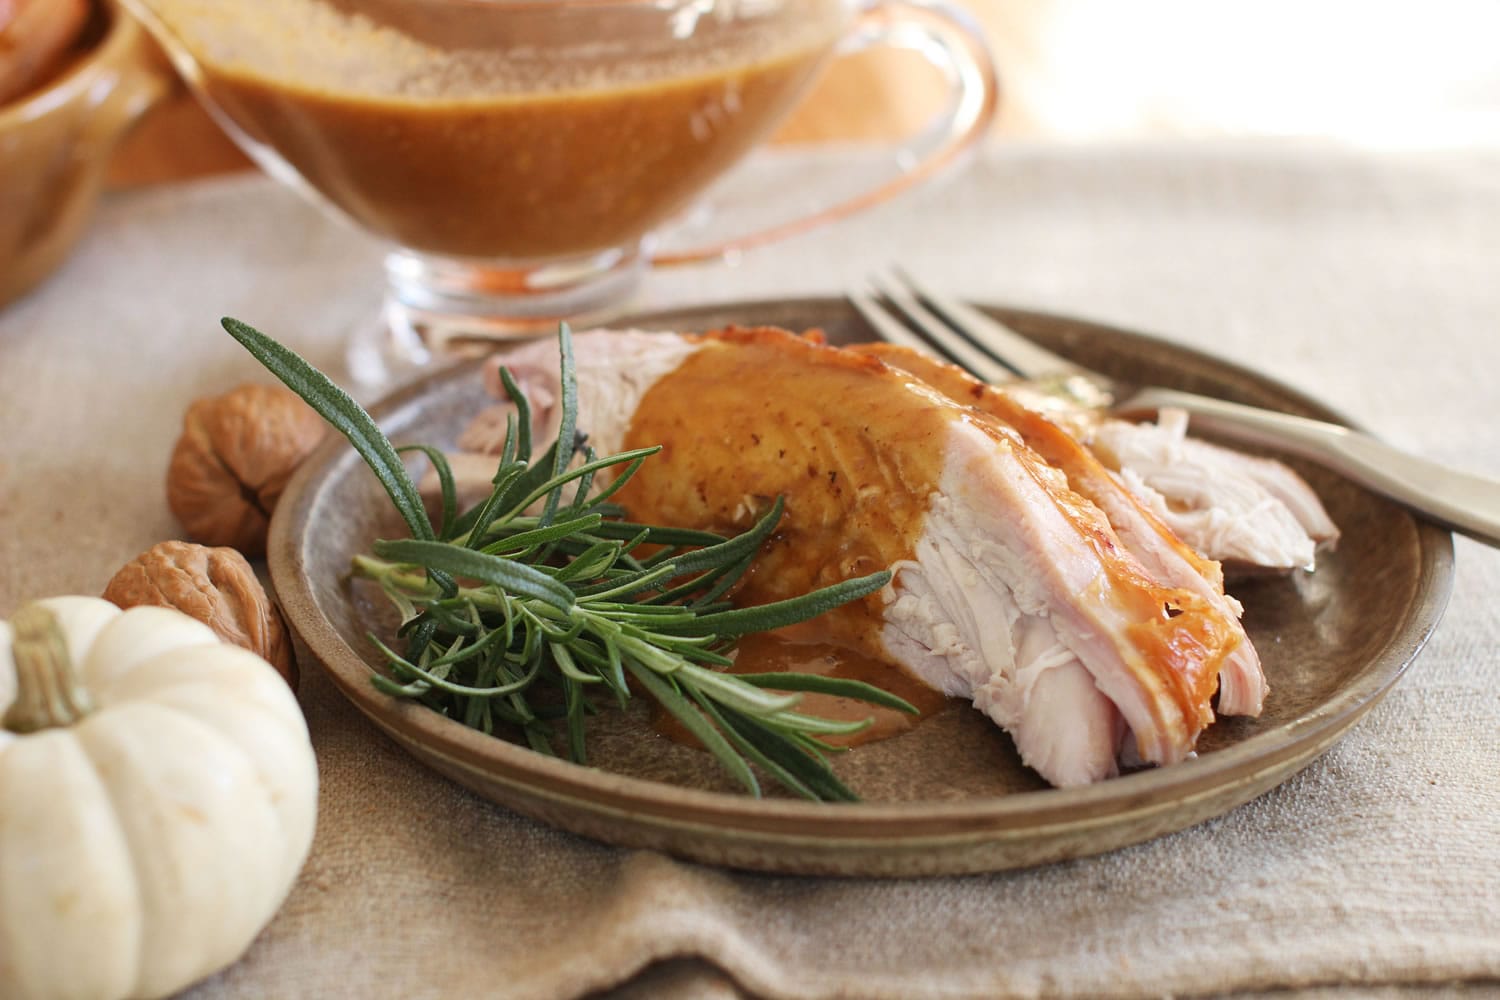 Regardless of how you cook the turkey, experts say to make sure you let it sit, undisturbed, on platter for at least 30 minutes before carving. This allows the bird to finish cooking more gently and reabsorb all of its juices, producing moist meat.